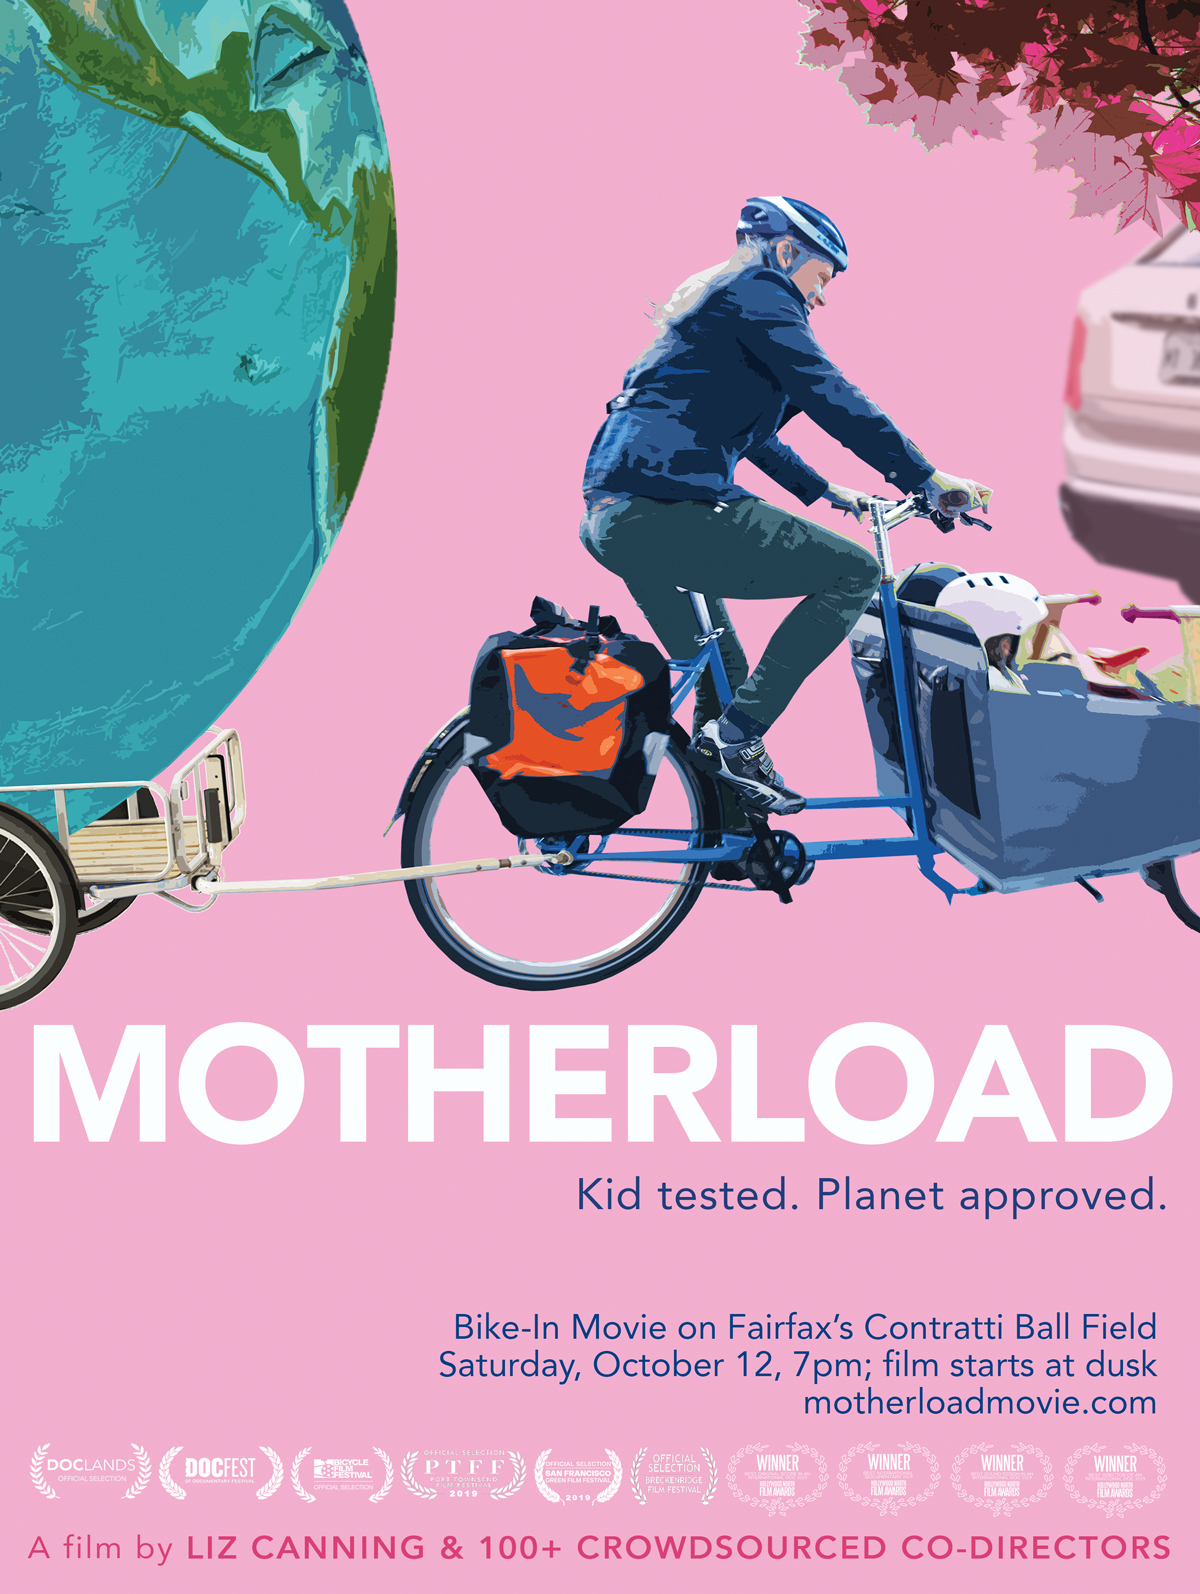 Motherload: searching for freedom and connection in a gas-powered, digital and divided world